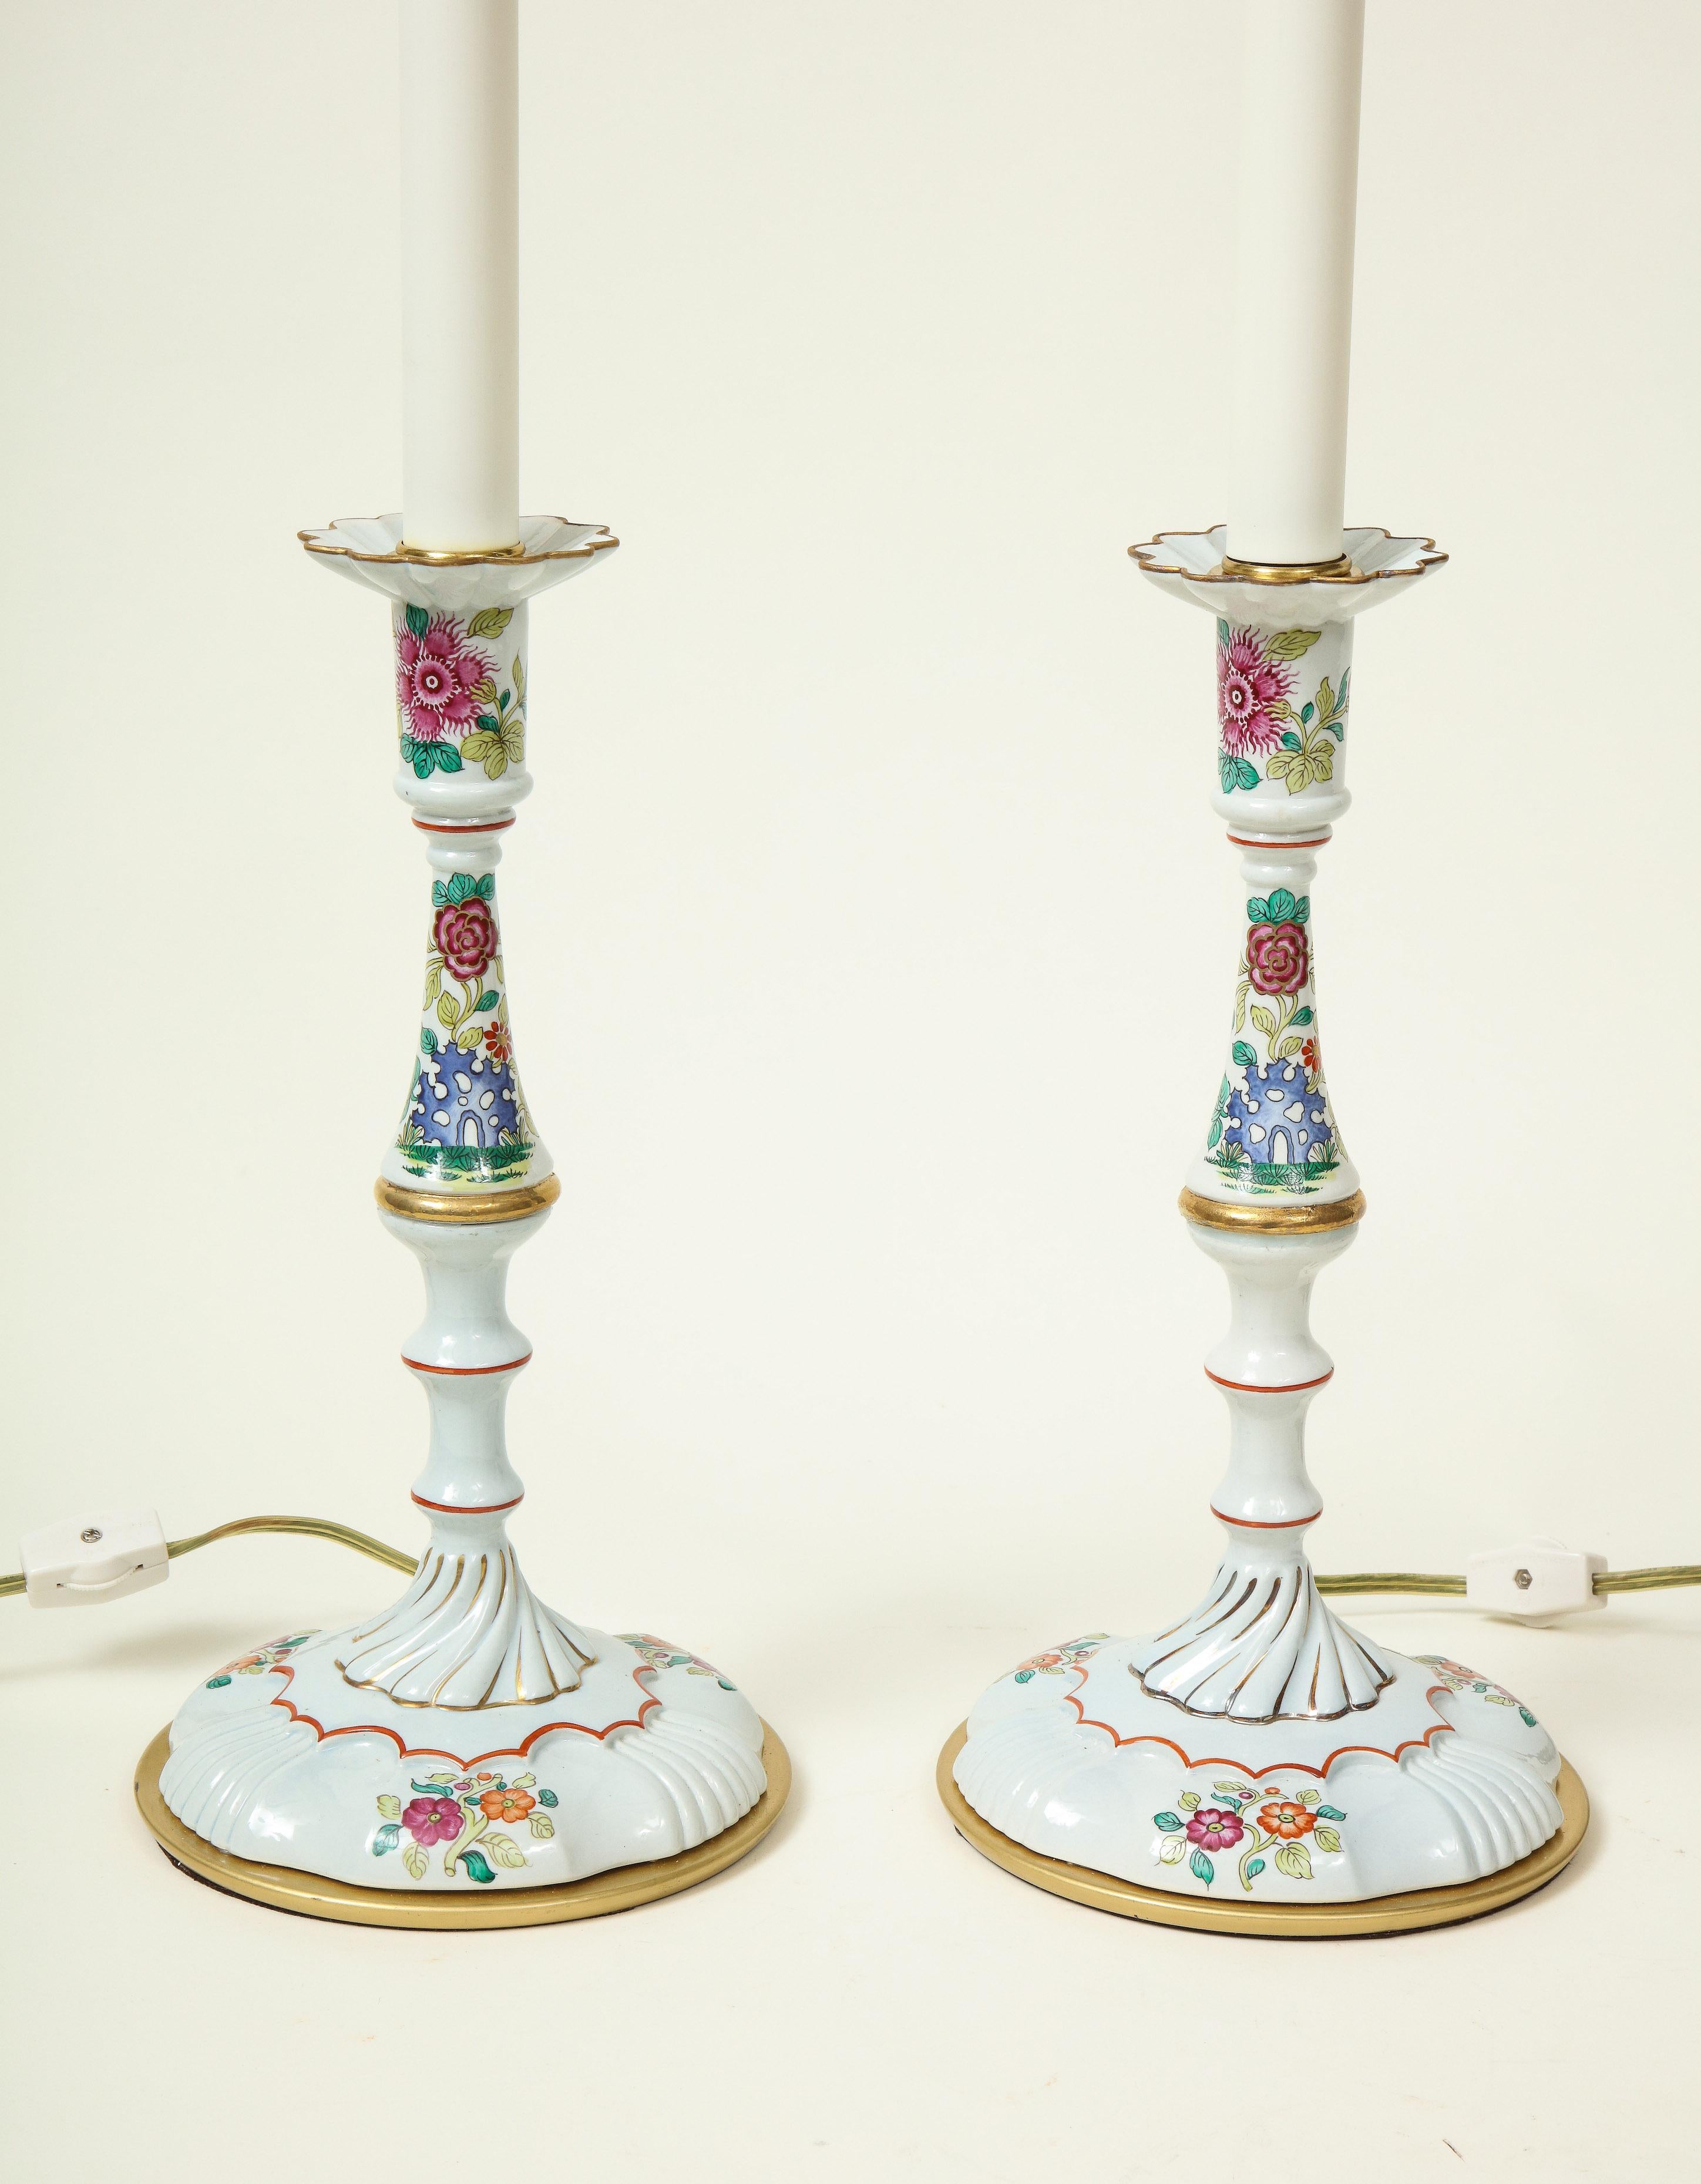 Each with candle sleeves supported by white enameled and gilt metal candlesticks decorated with floral sprays. Lamps designed by Mario Buatta for Frederick Cooper.
 